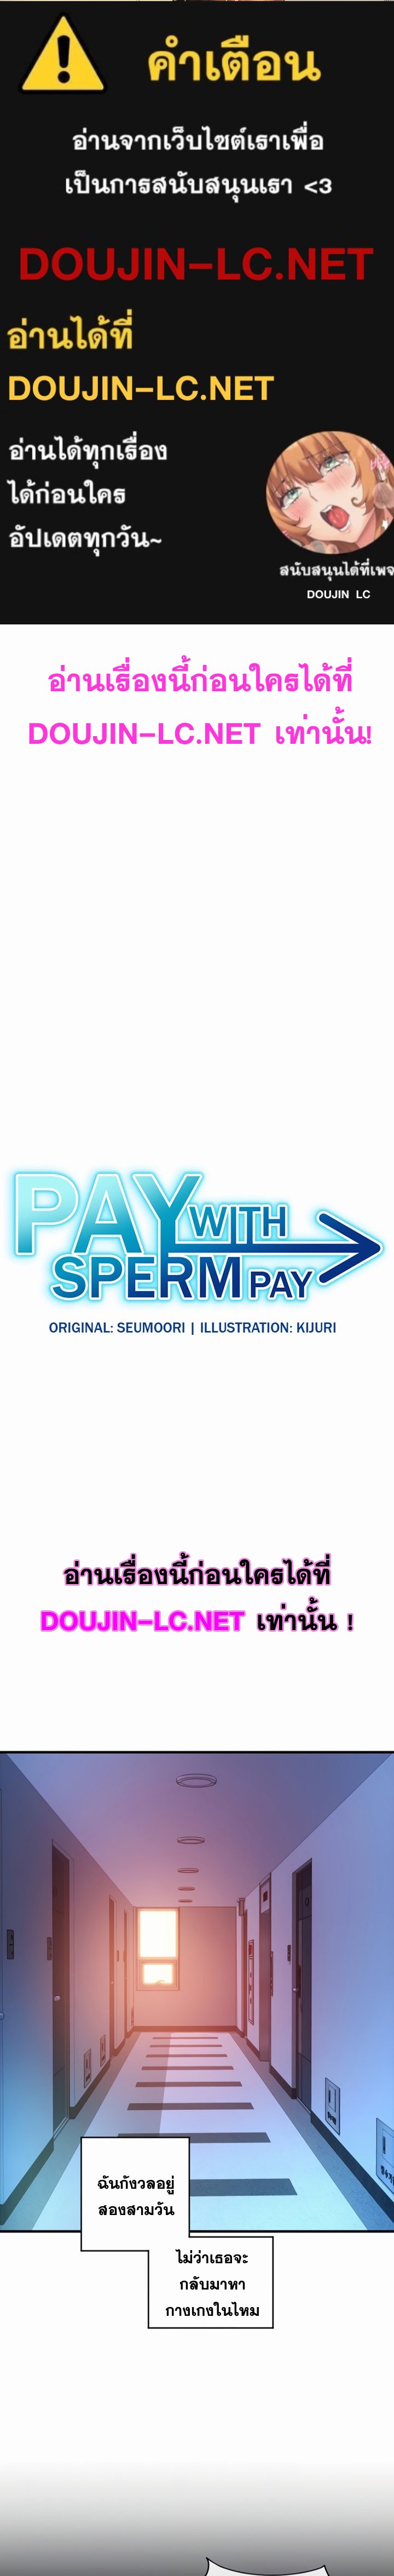 Pay with Sperm Pay 28 01